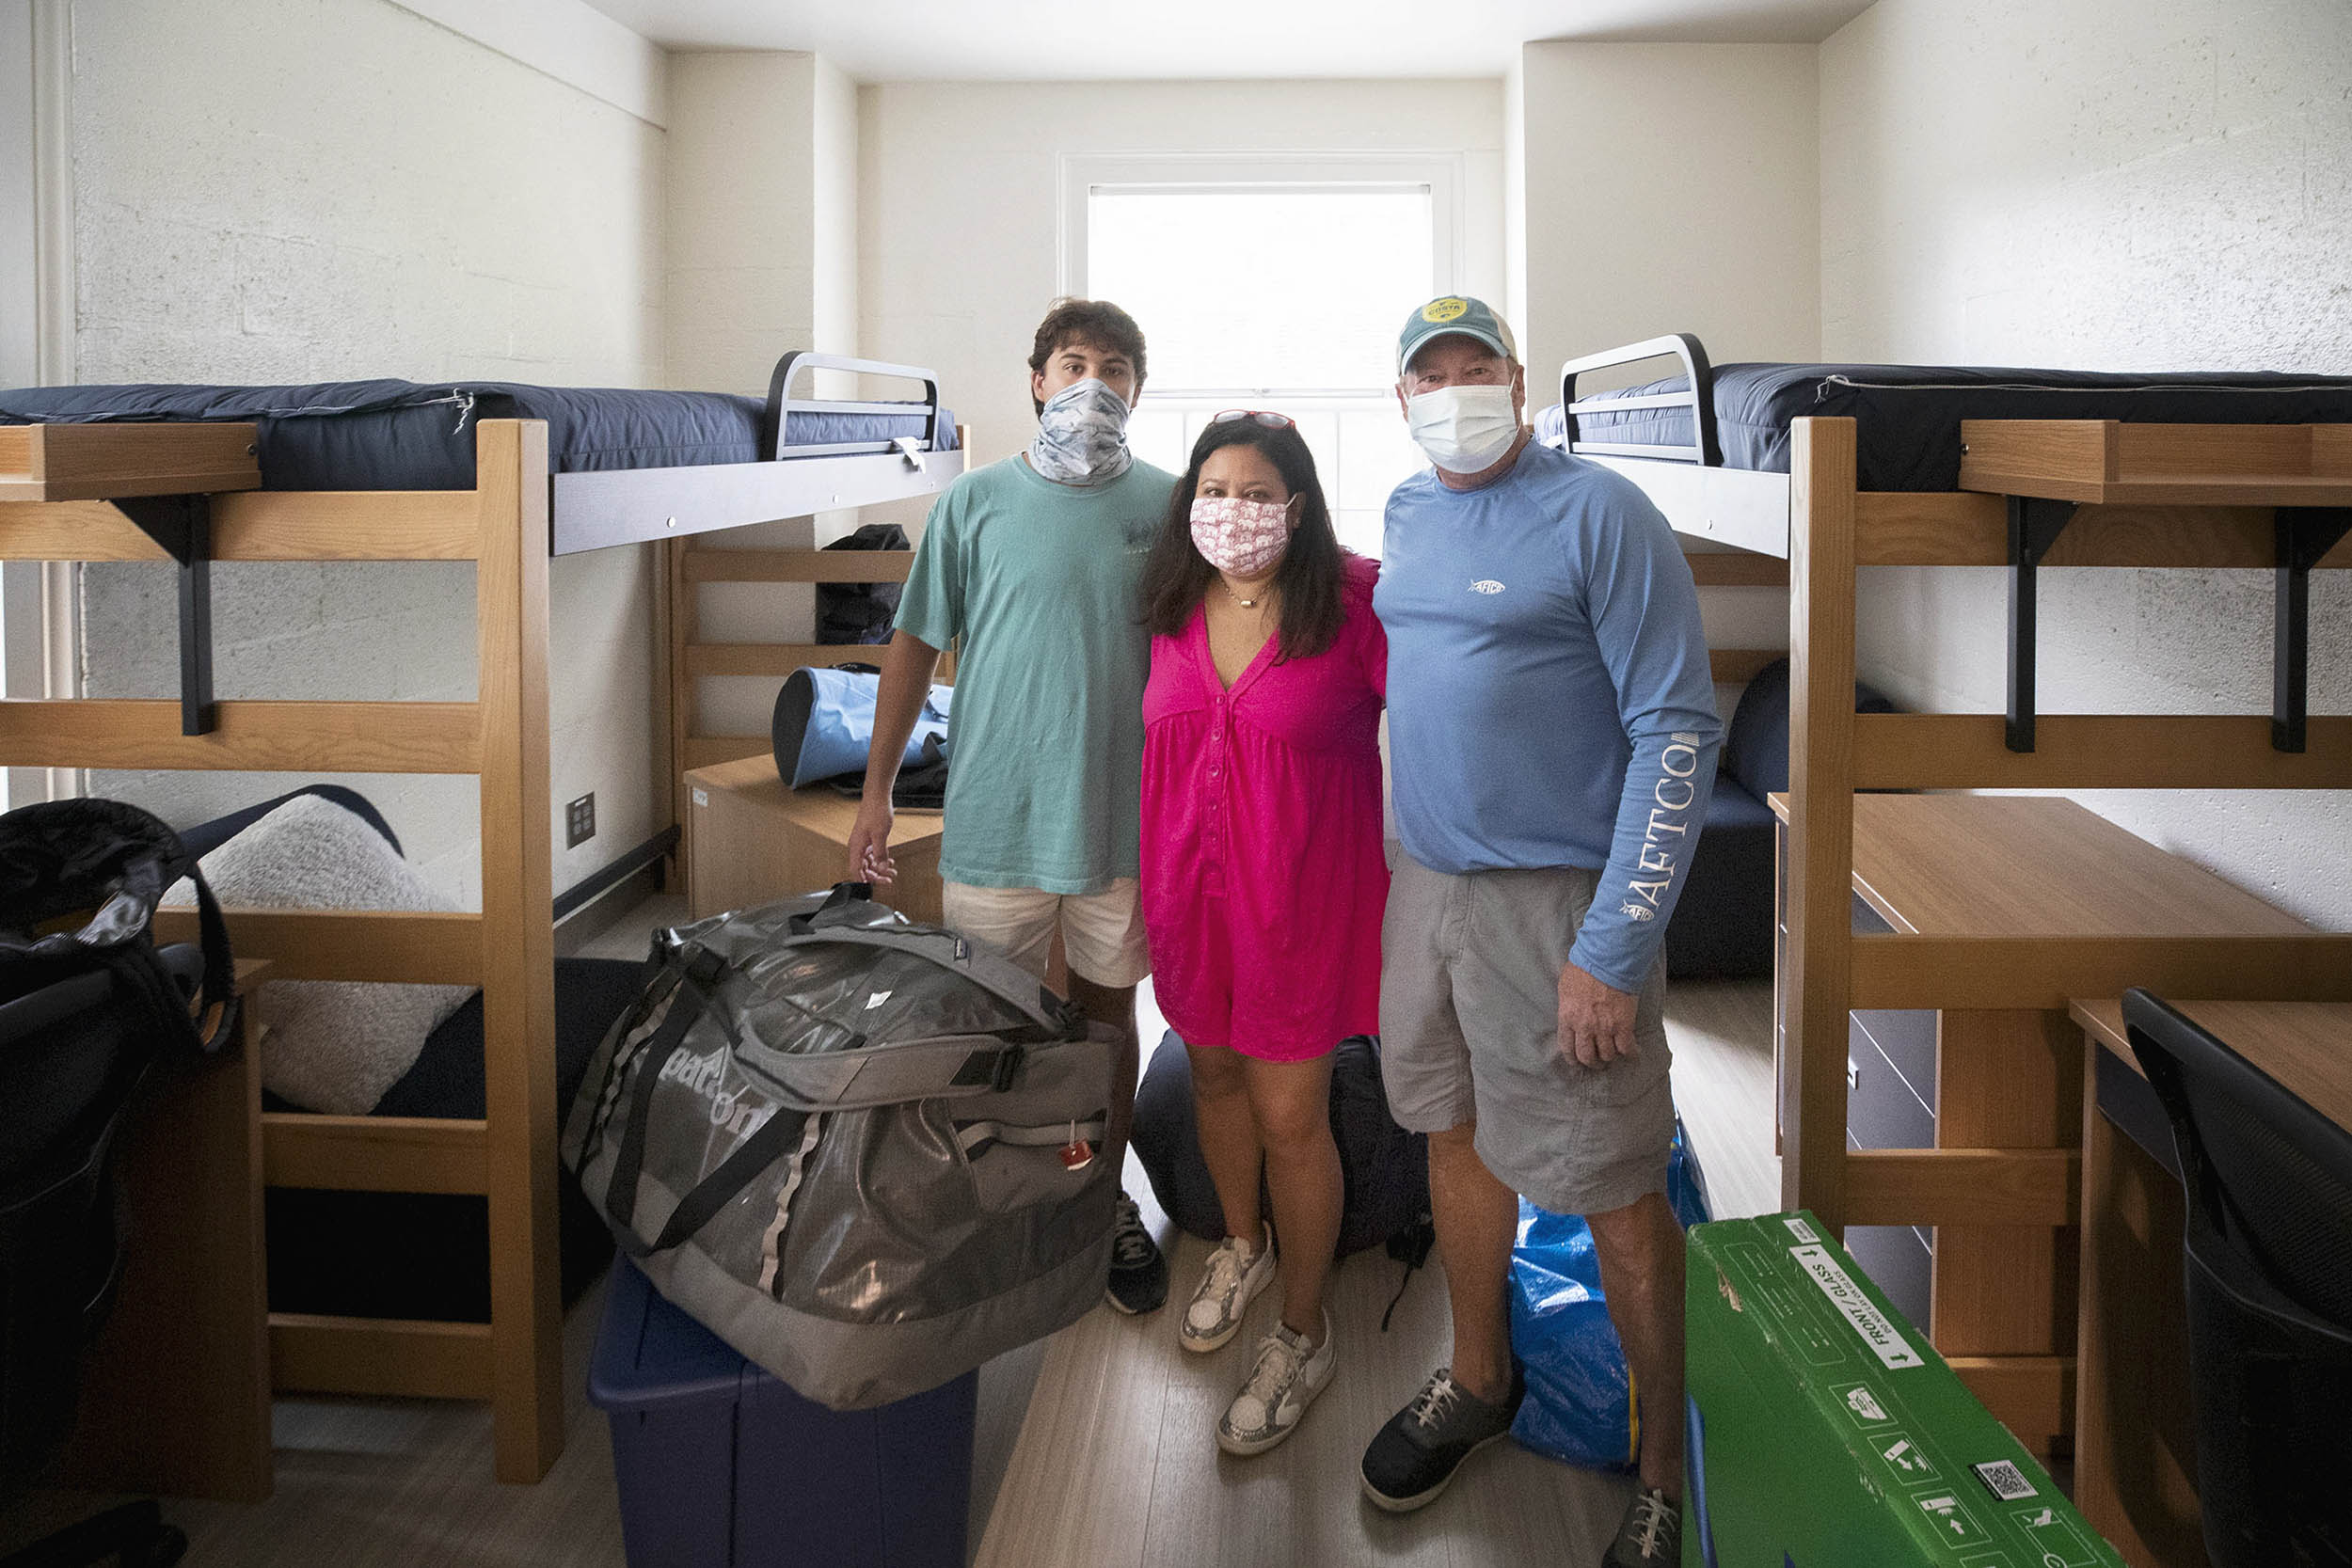 Student and family in their dorm room posing for a picture together with boxes and luggage around